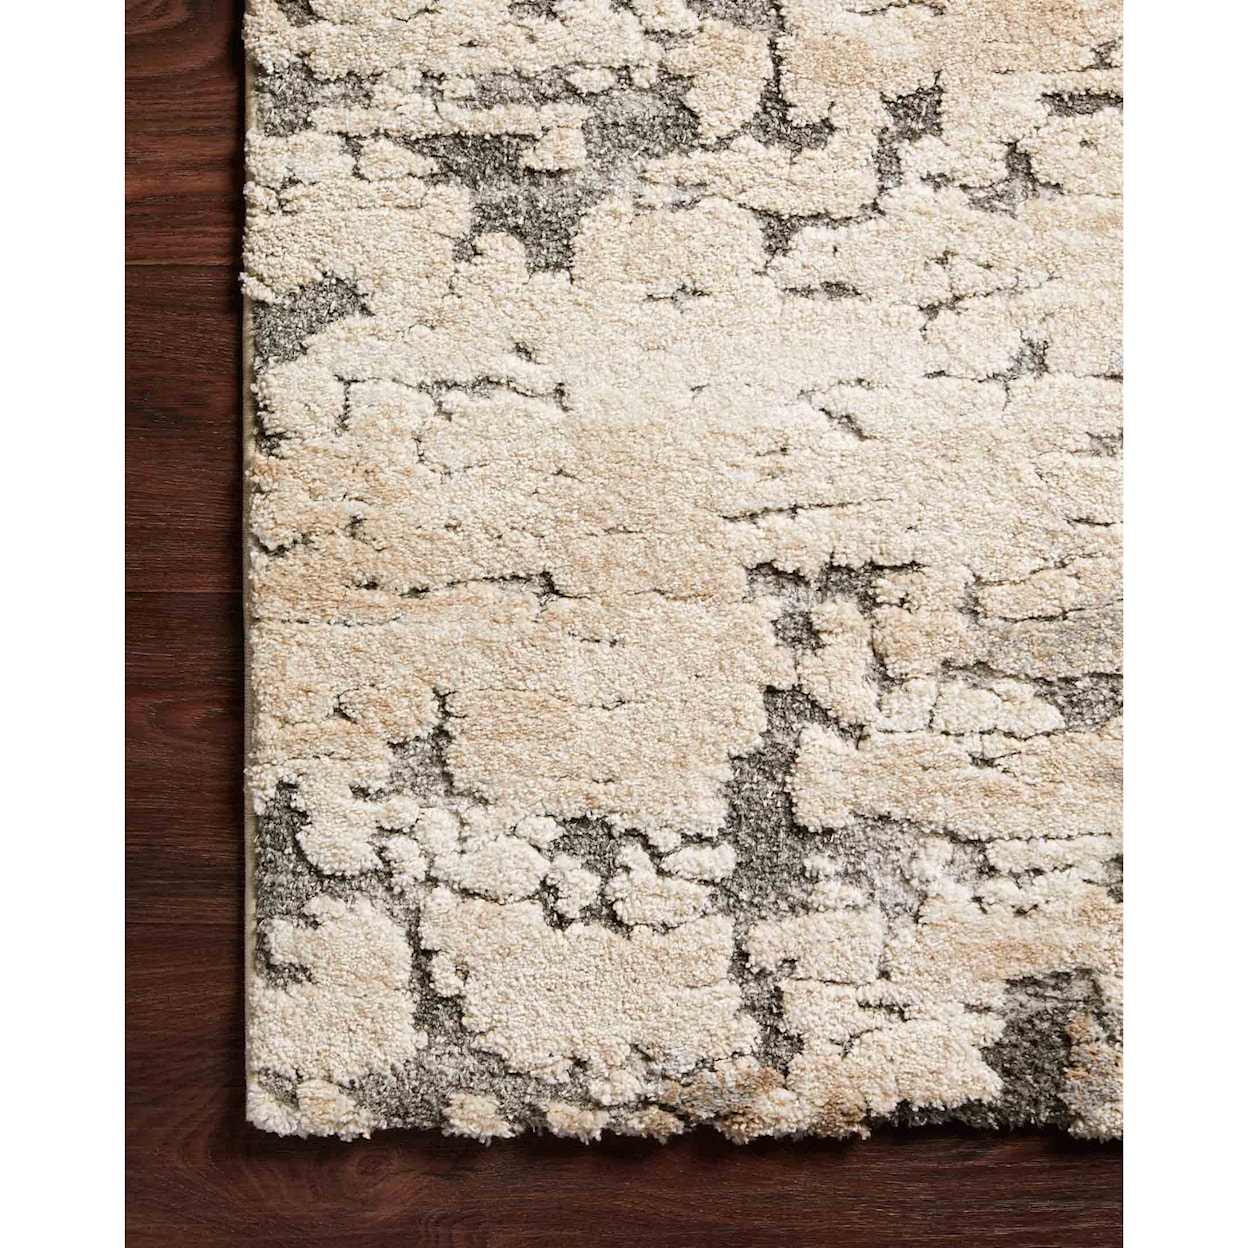 Reeds Rugs Theory 2'7" x 4' Taupe / Grey Rug